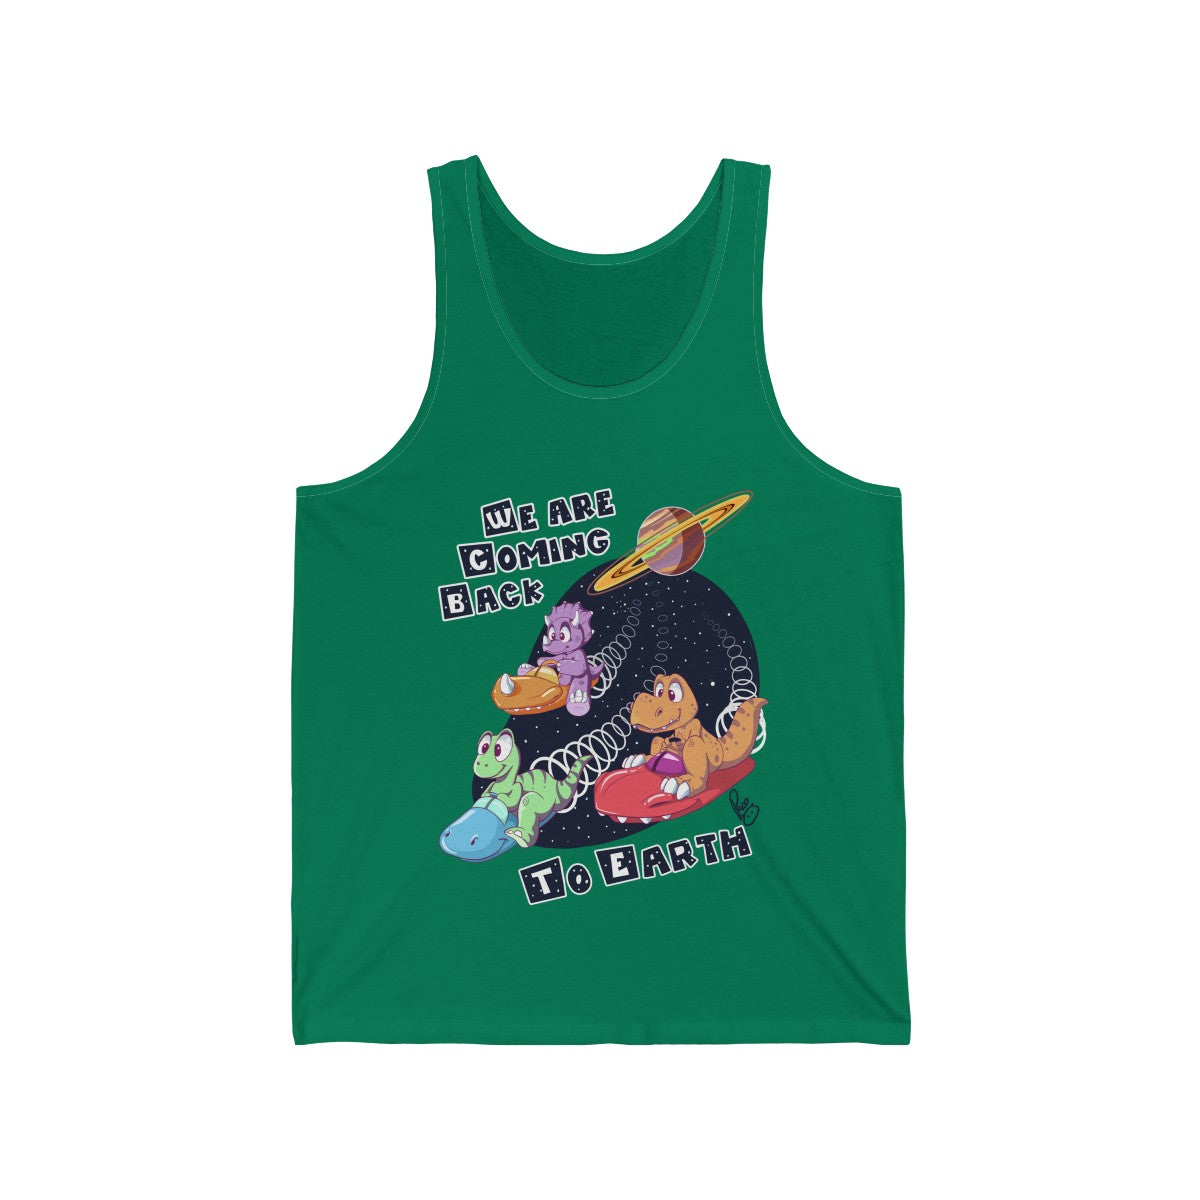 We are coming back to Earth - Tank Top Tank Top Paco Panda Green XS 